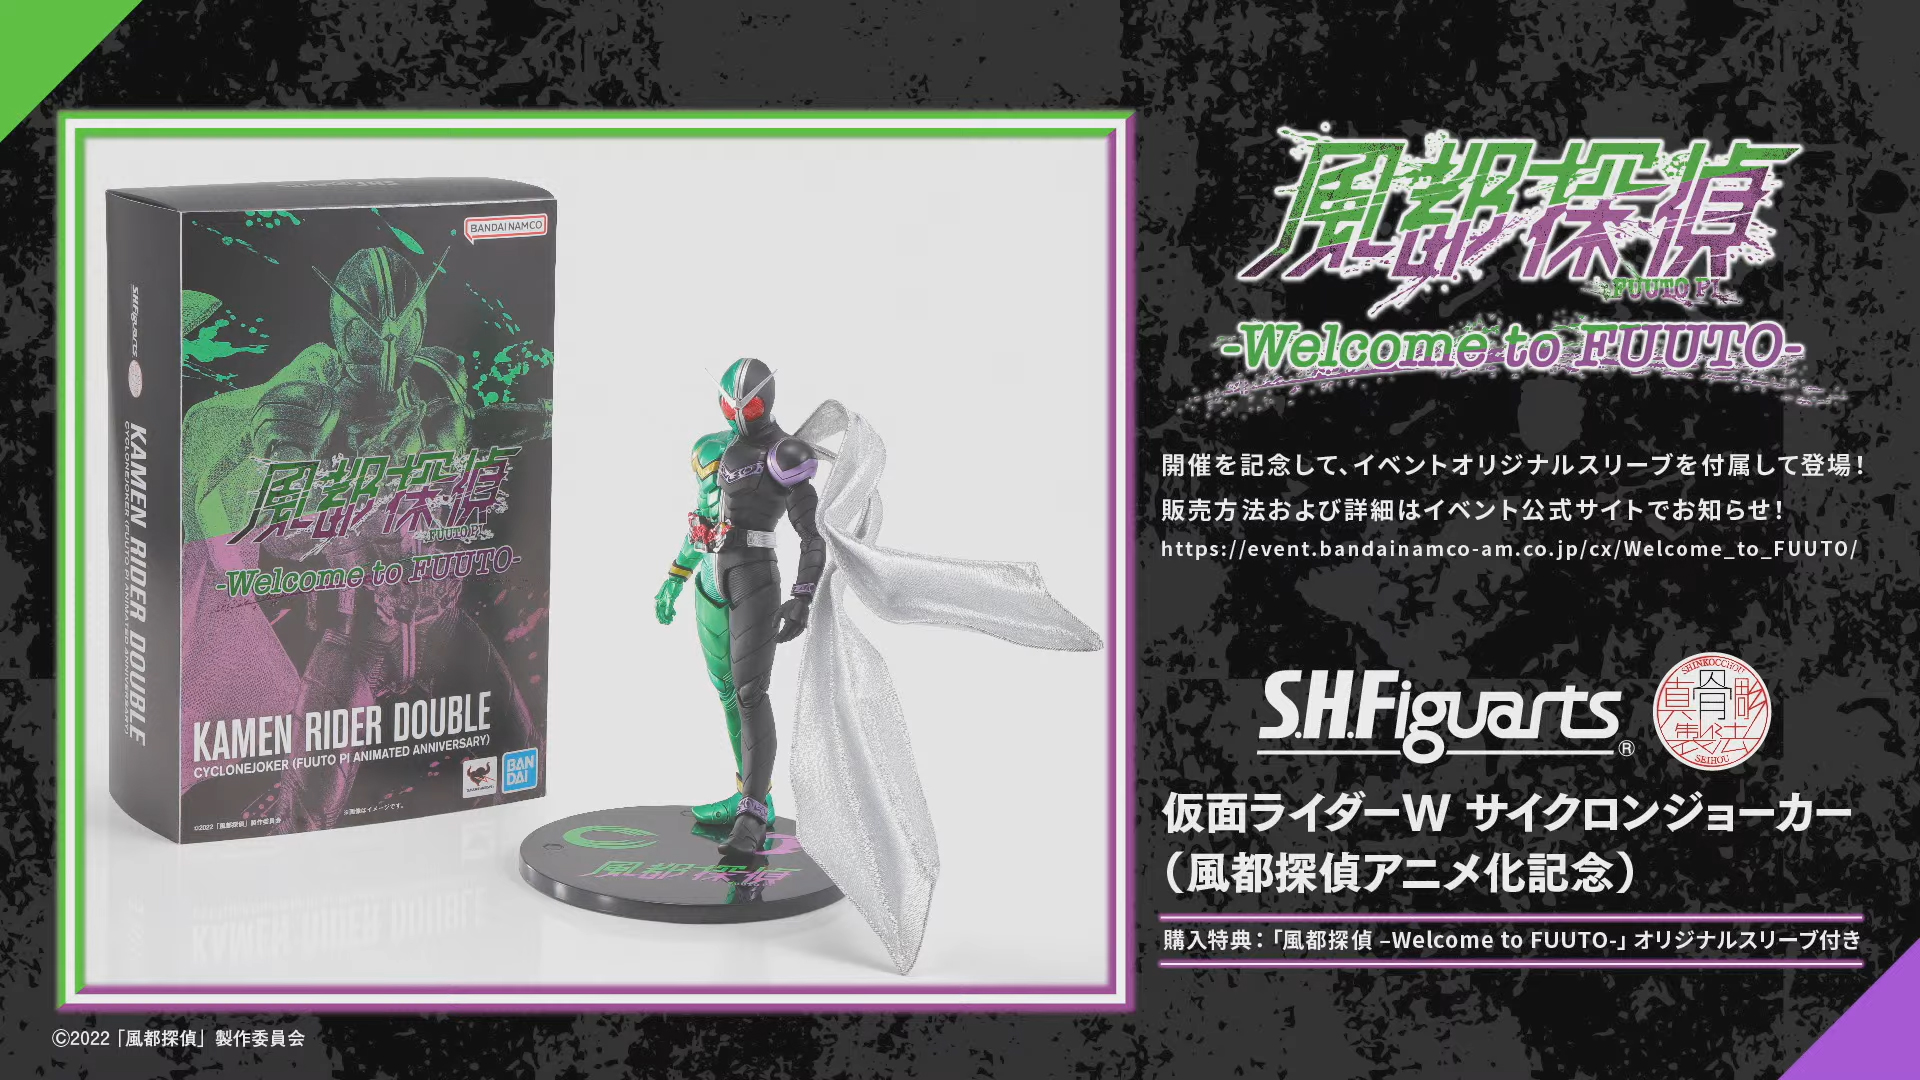 &quot;Kamen Rider Aguilera&quot; and &quot;SHINKOCCHOU SEIHOU MASKED RIDER V3&quot; will be released! &quot;PRE-BAN LAB Z&quot; Rider Arts Day Official After Report!